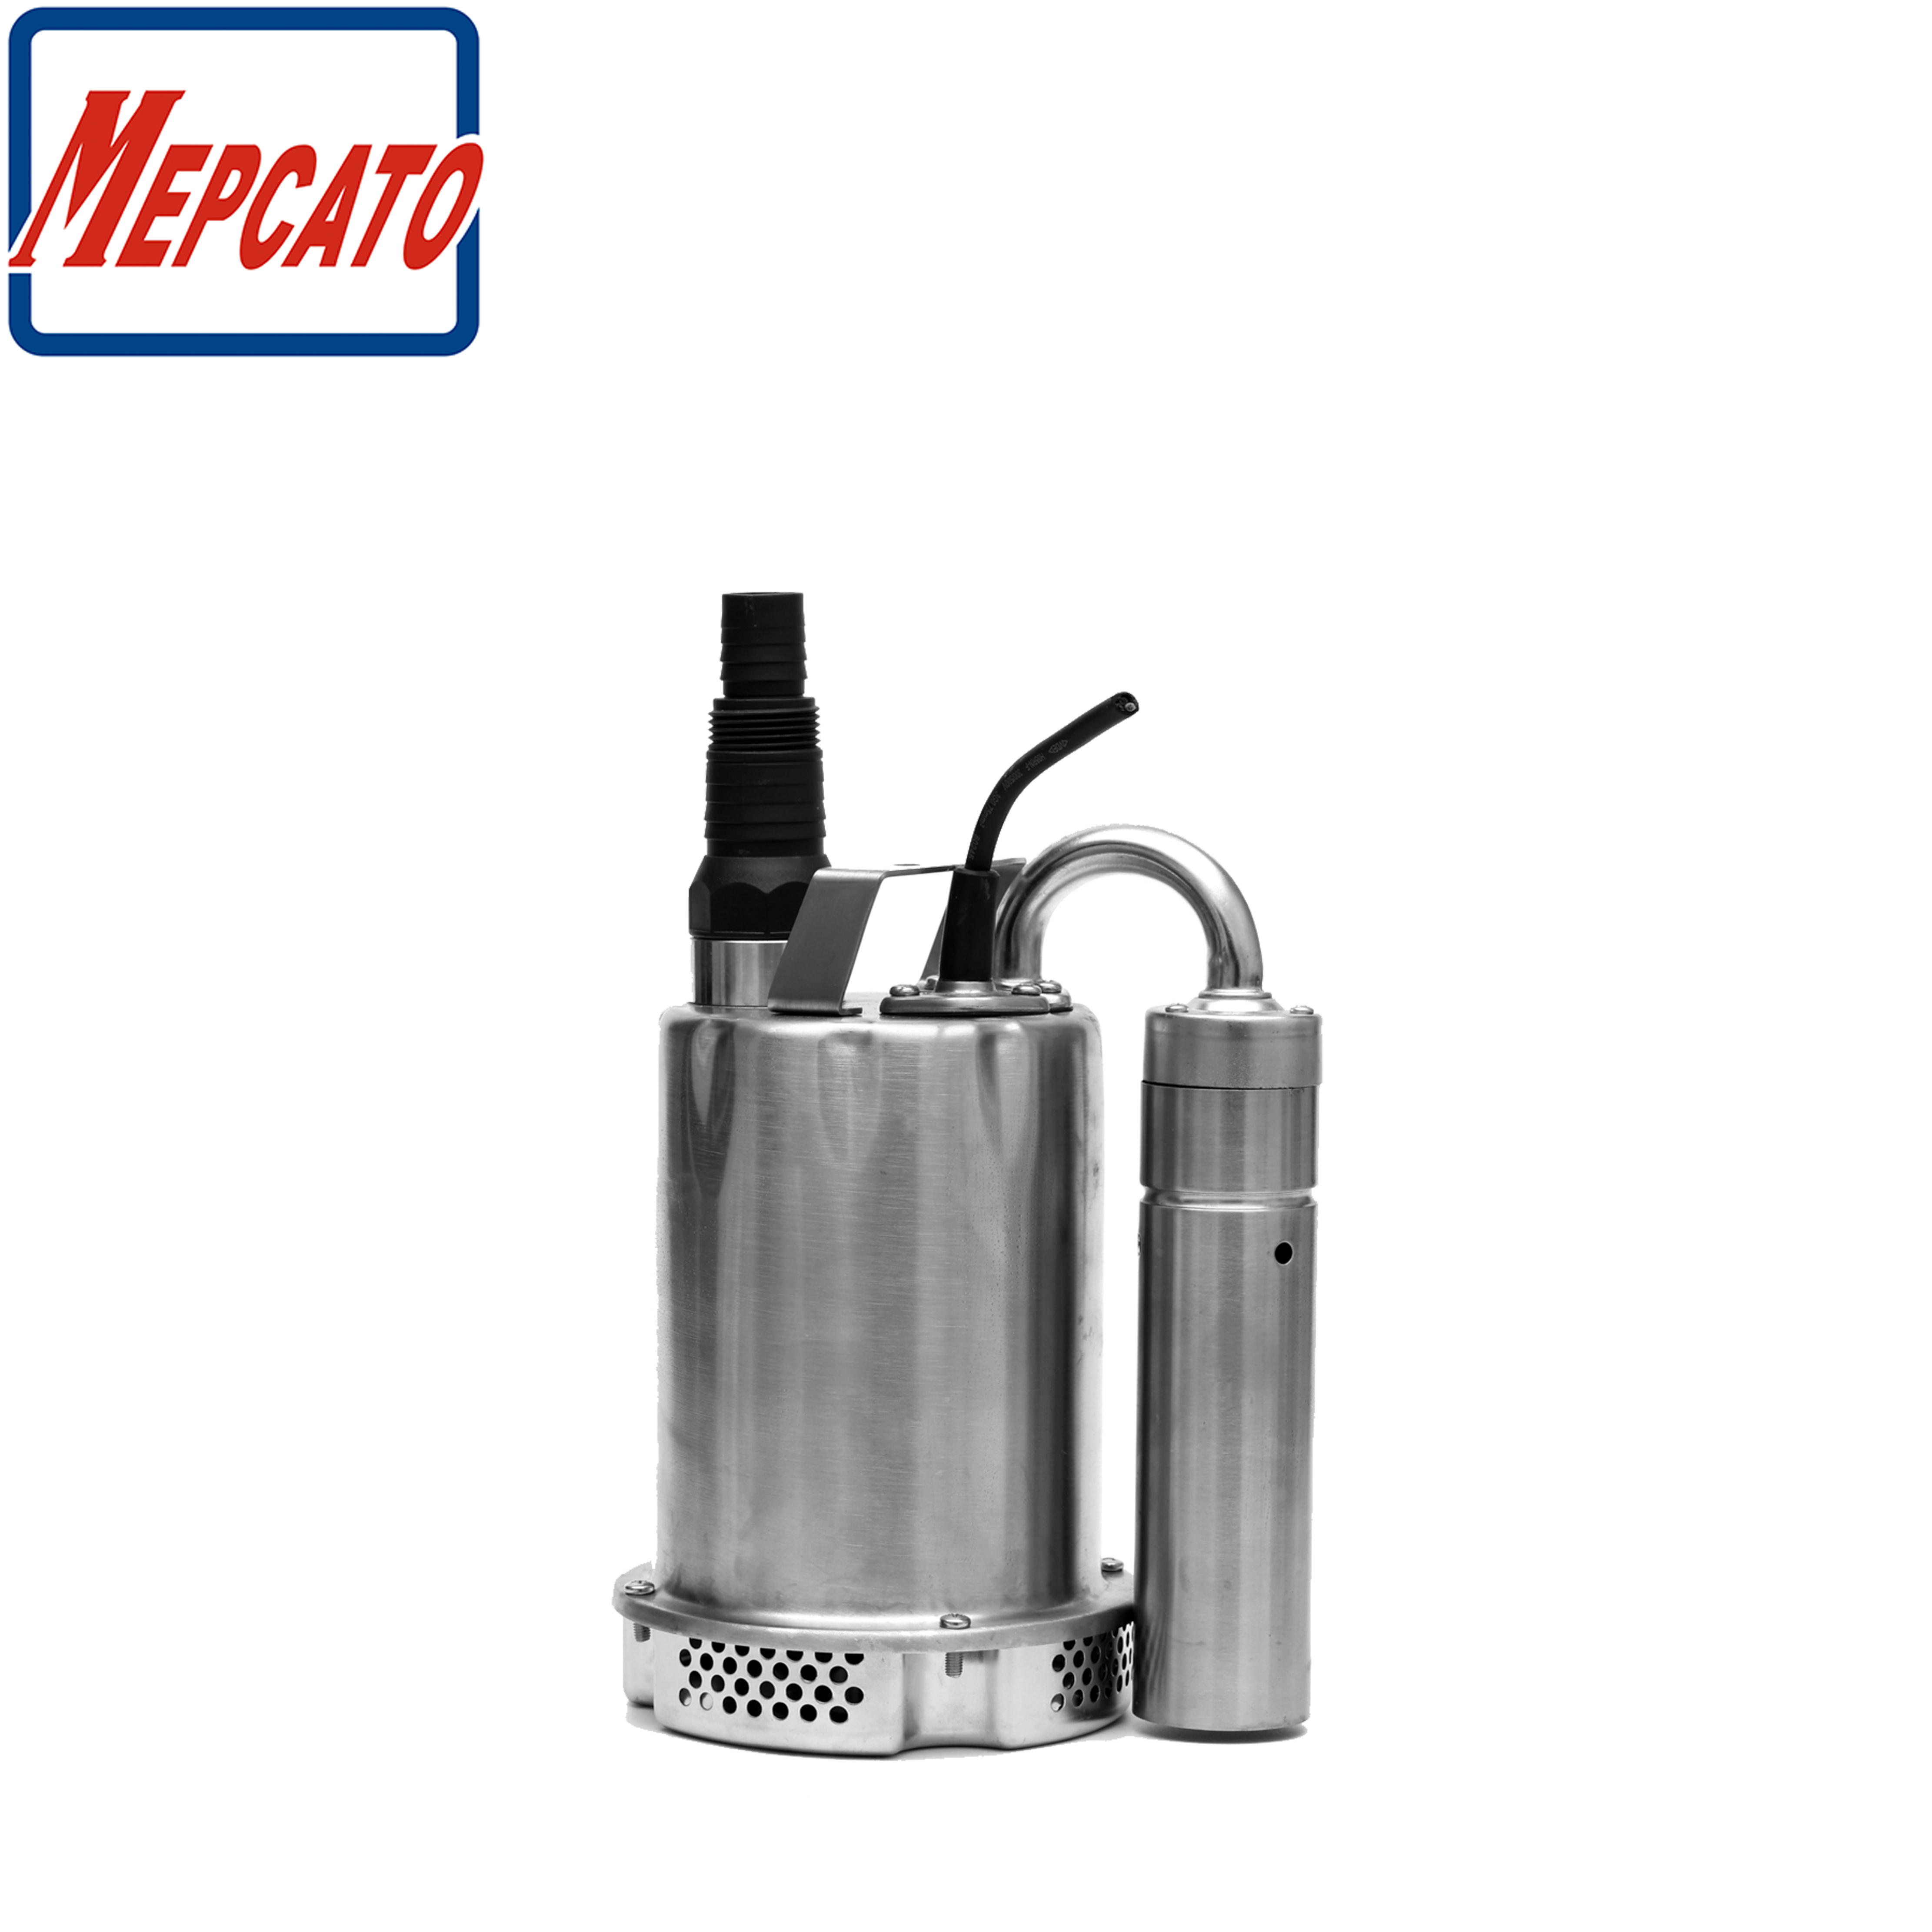 Utility Stainless Steel Submersible Pump with Float Switch